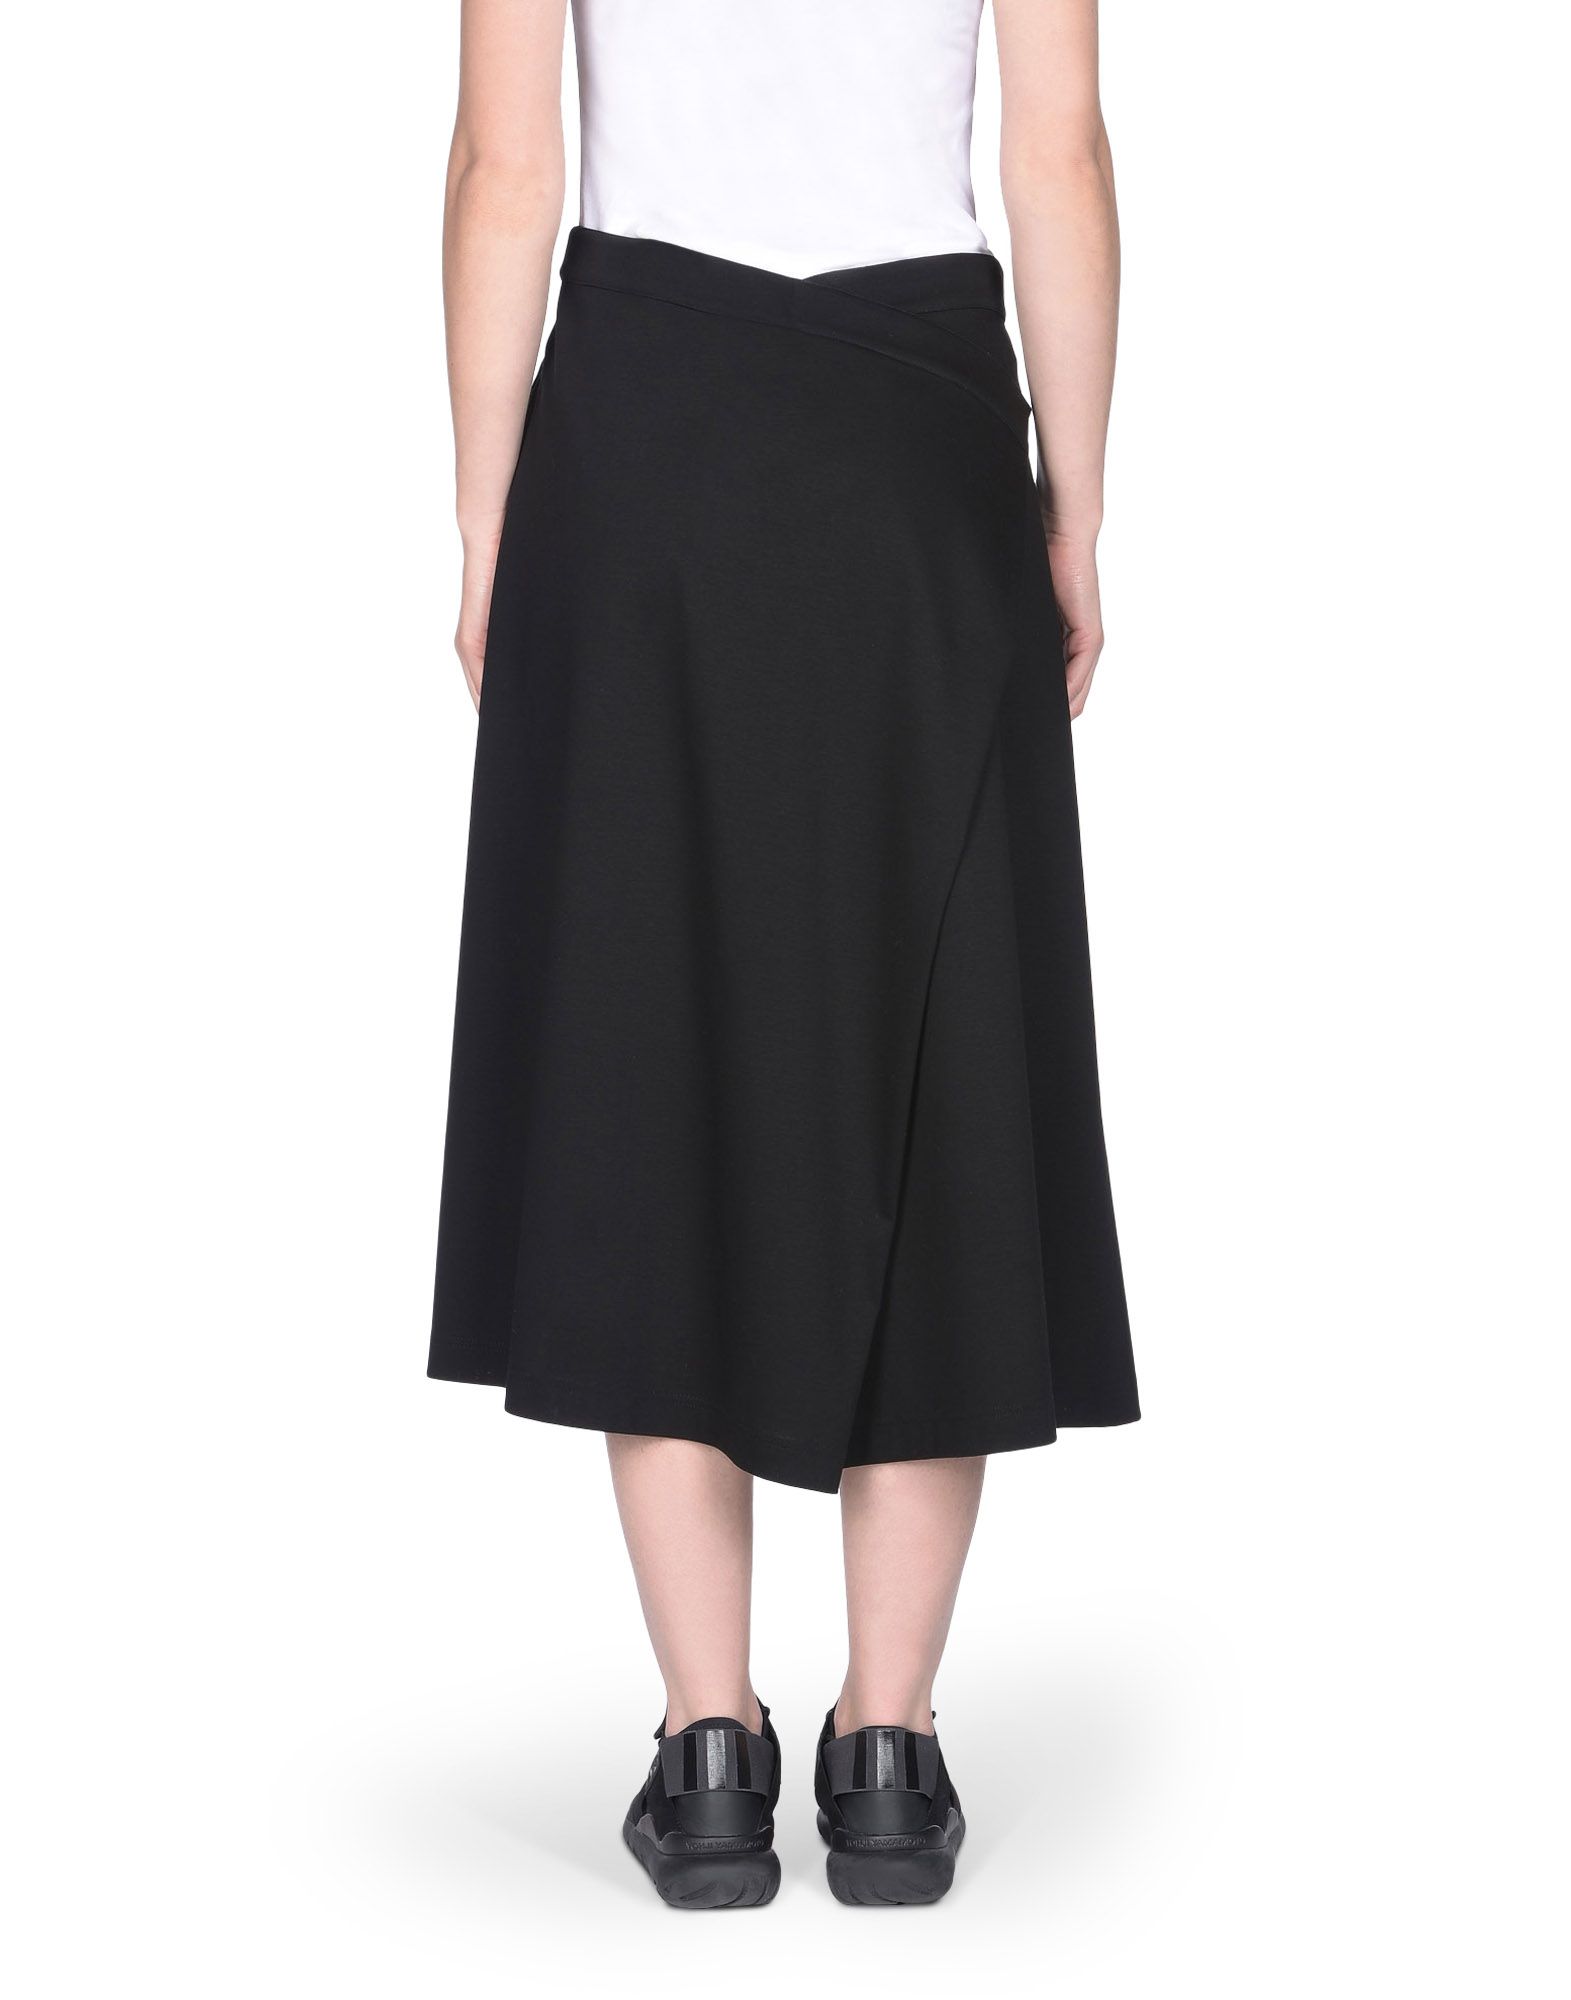 Y 3 LIGHT TRACK SKIRT for Women | Adidas Y-3 Official Store